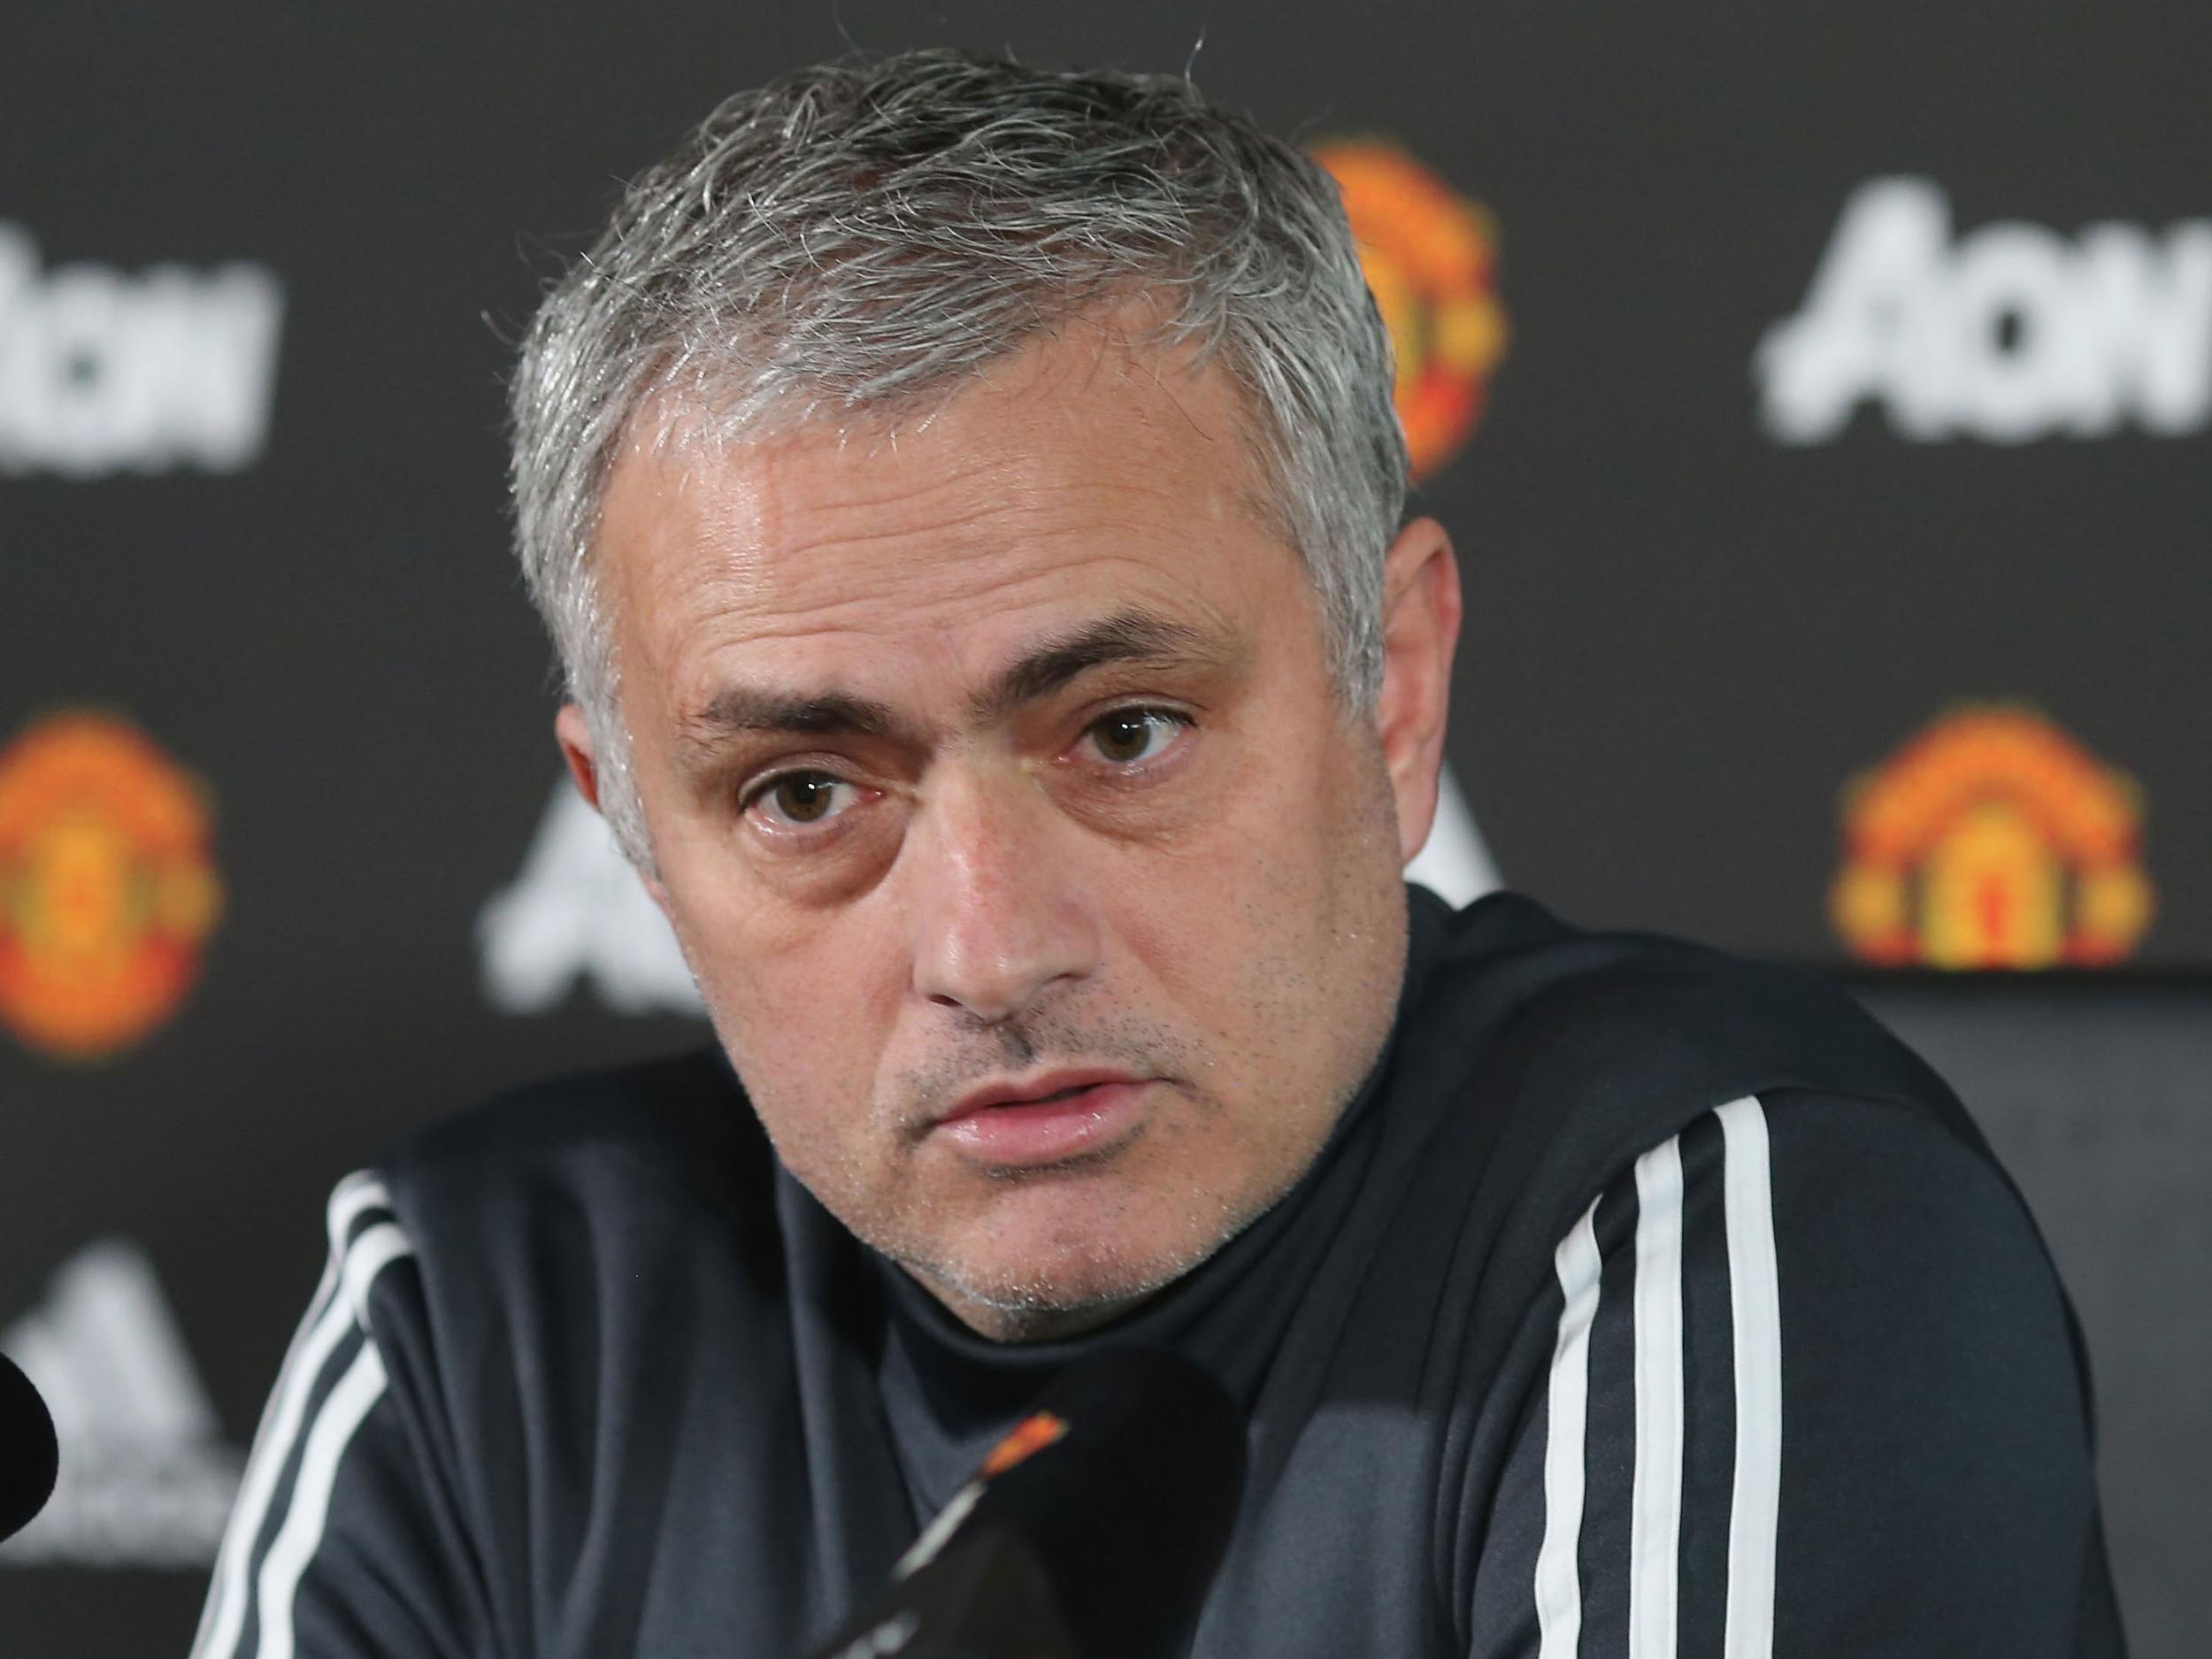 Jose Mourinho believes some clubs are 'privileged' in terms of fixture scheduling